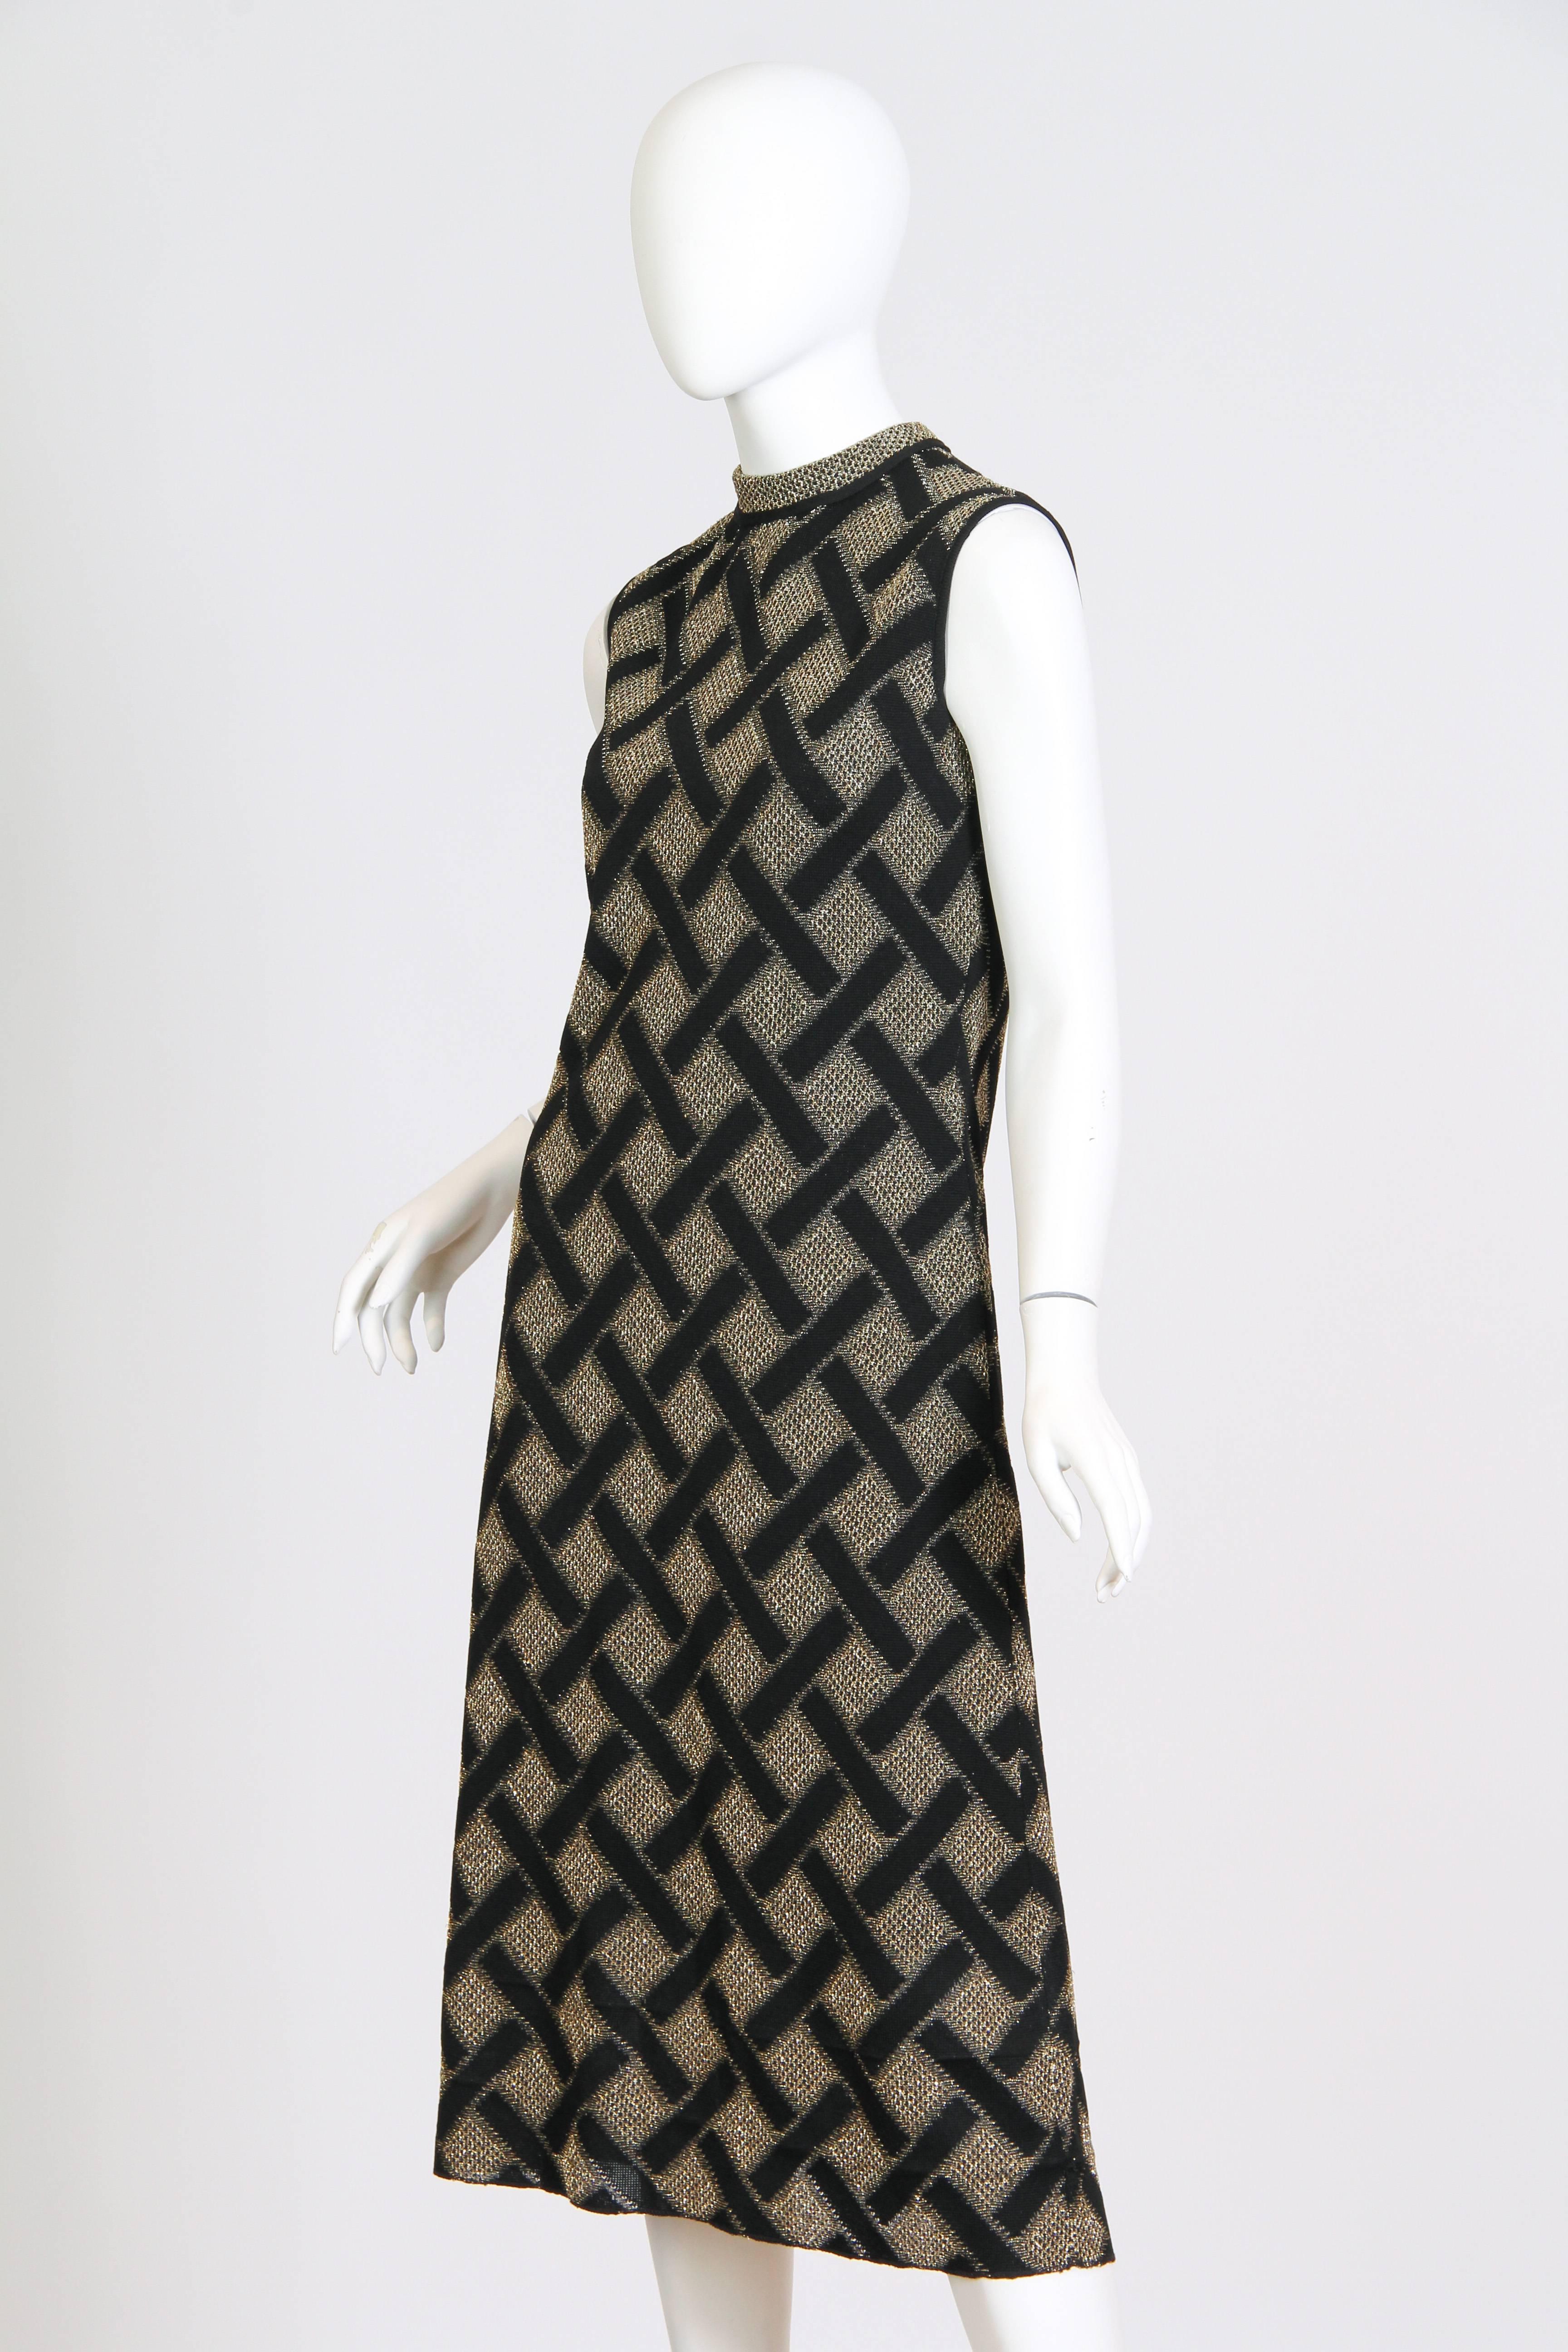 Pierre Balmain is a house known for luxury. In the 1960s and 1970s they also had an easier to wear knit line from which this comes. The dress is cut away from the body in a flatteringly almost mod line. The knit is a poly lurex blend which gives